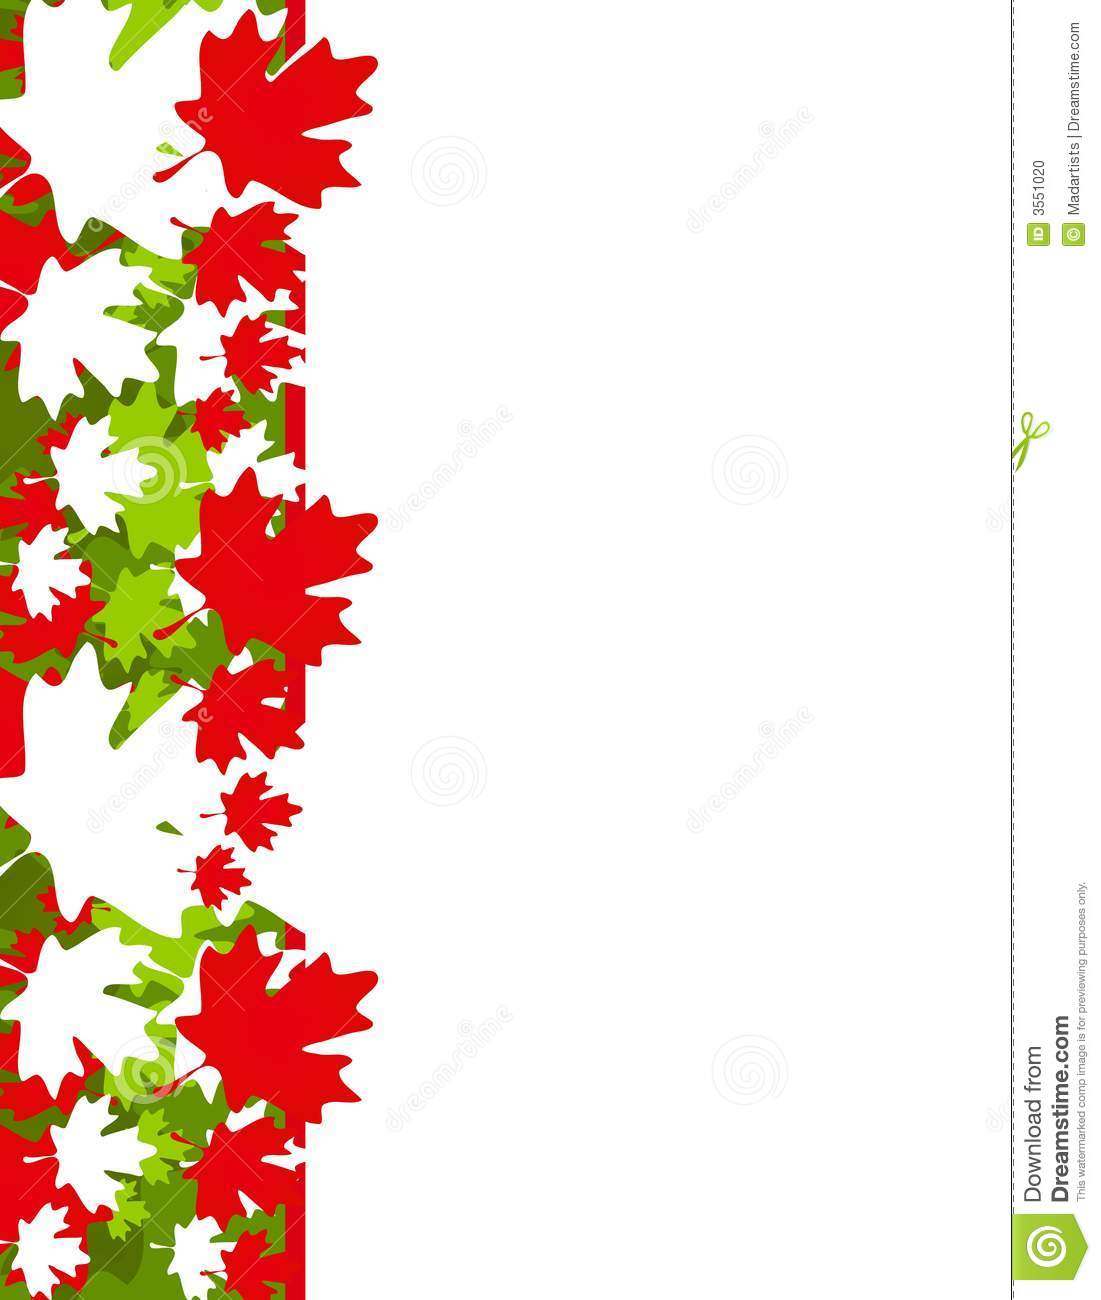 Border Illustration Featuring A Collage Of Maple Leaf Designs In